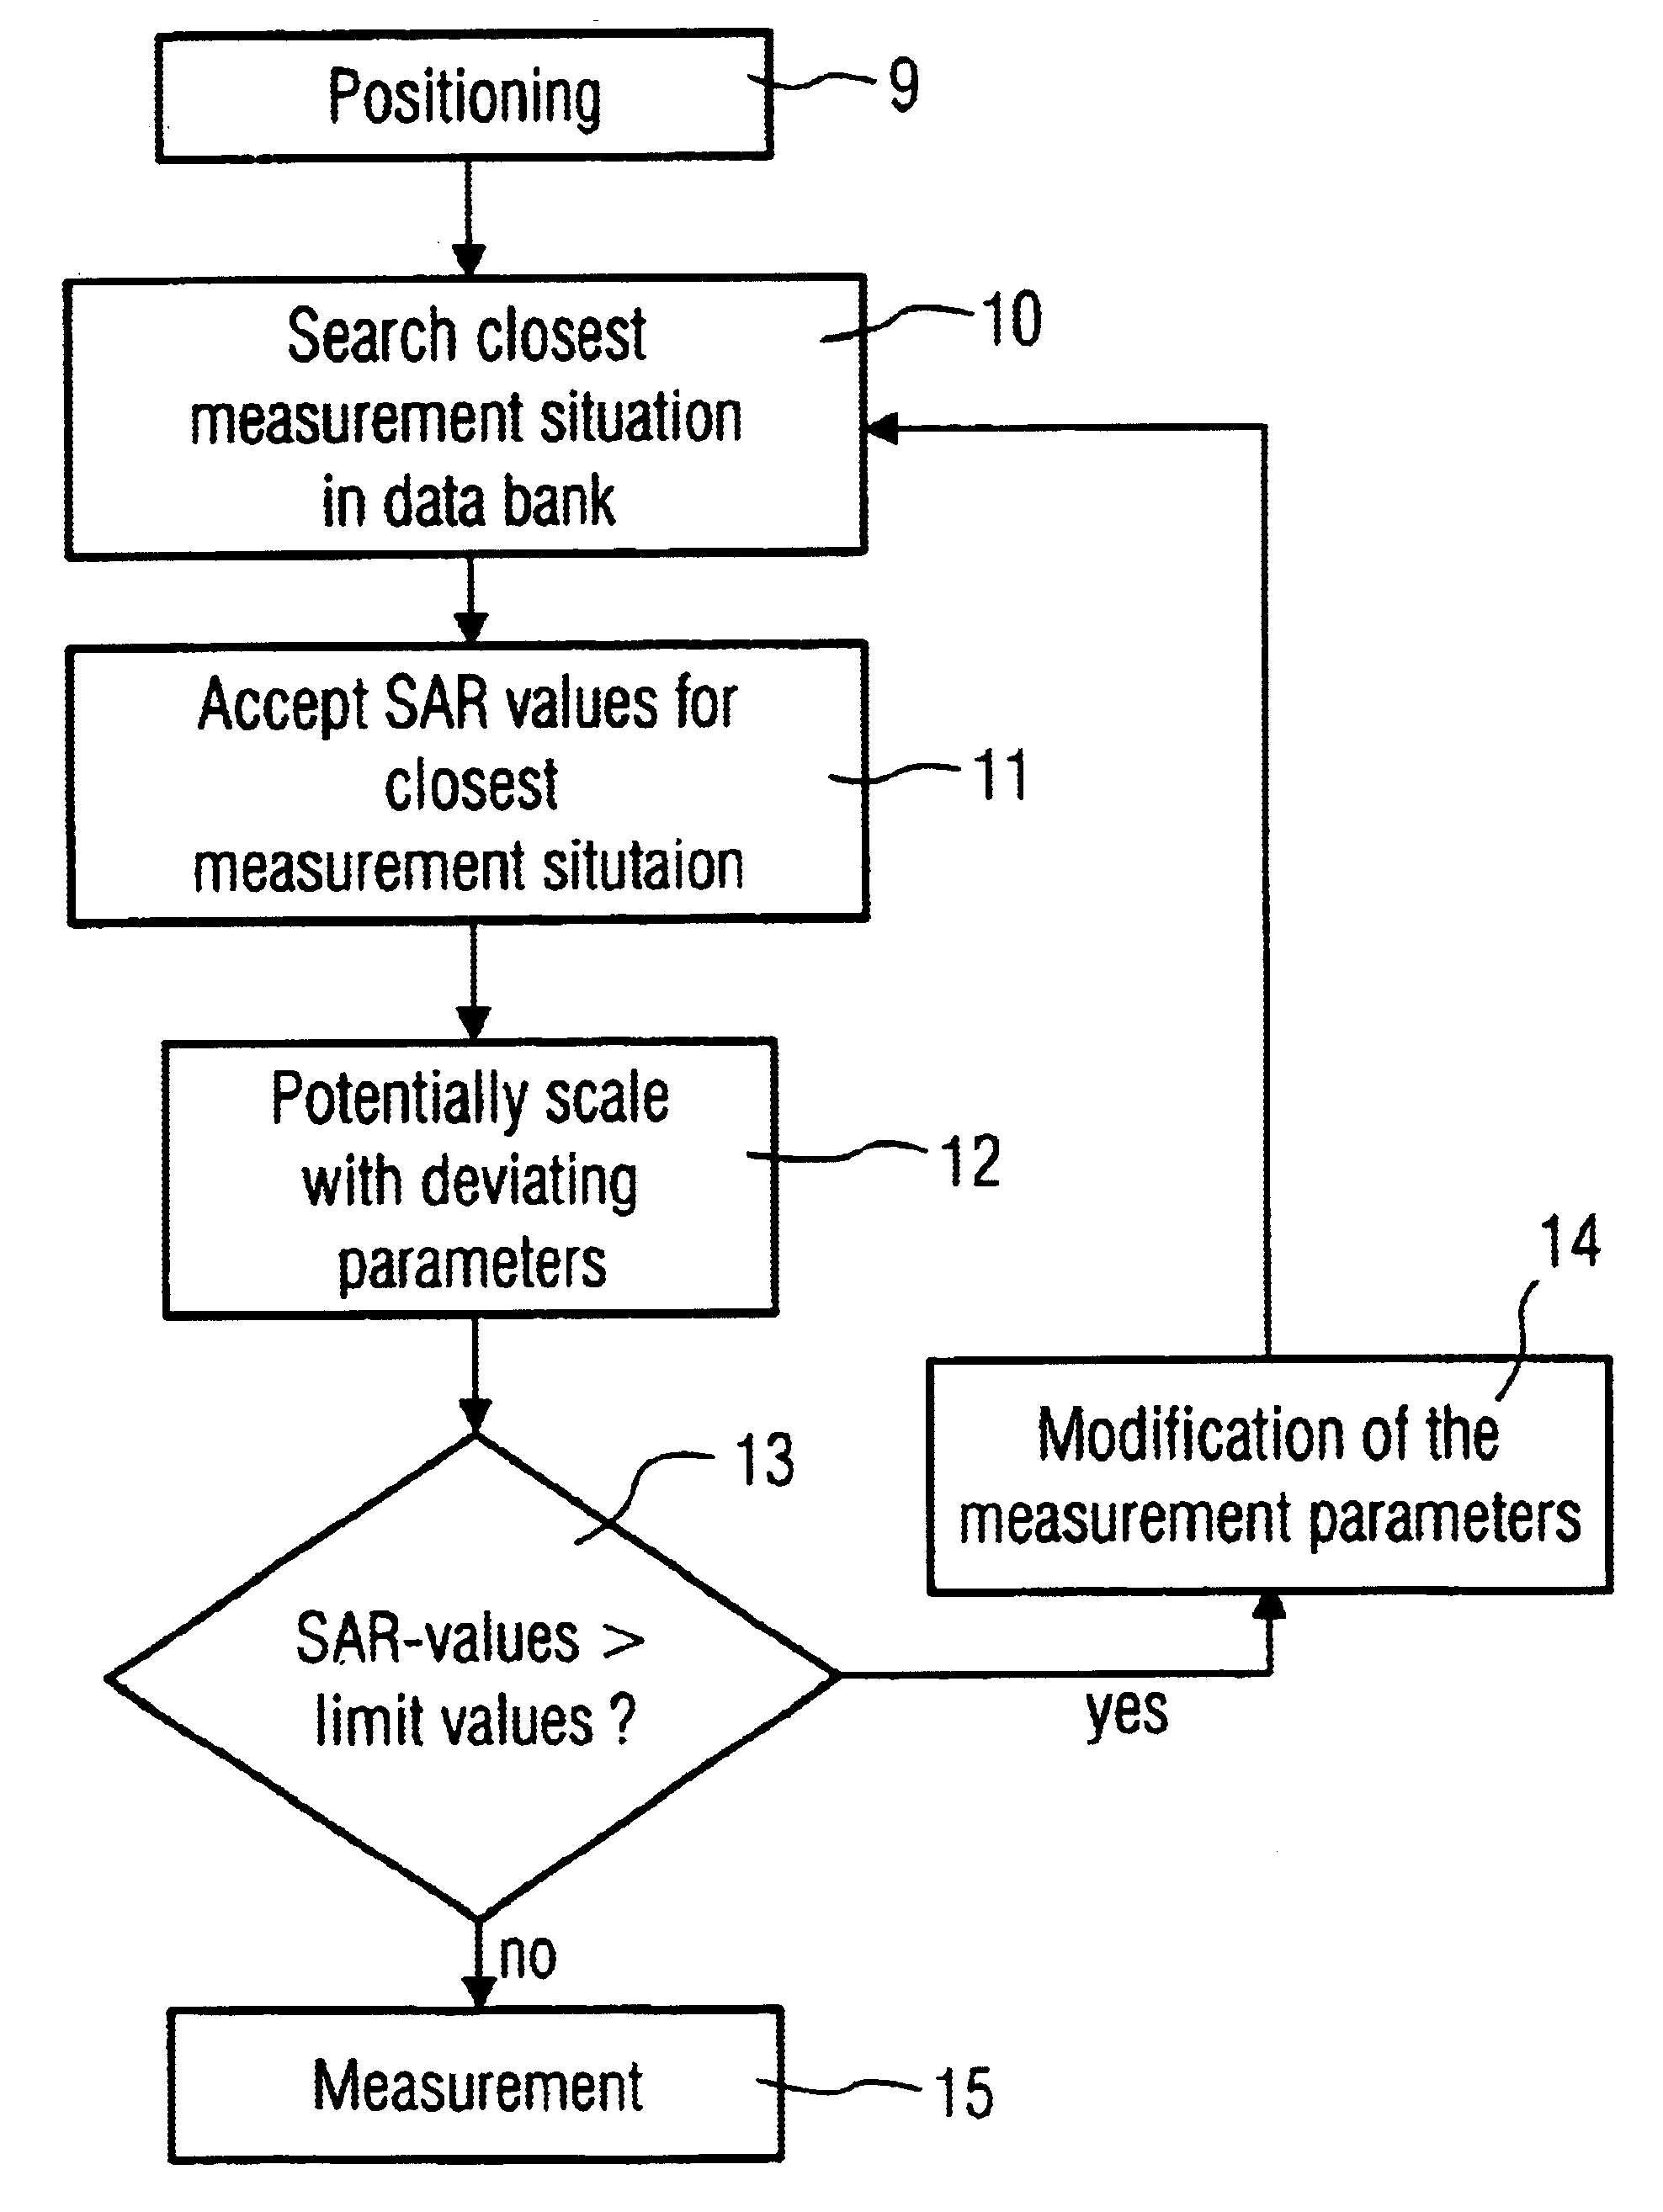 Magnetic resonance imaging apparatus and method with adherence to SAR limits